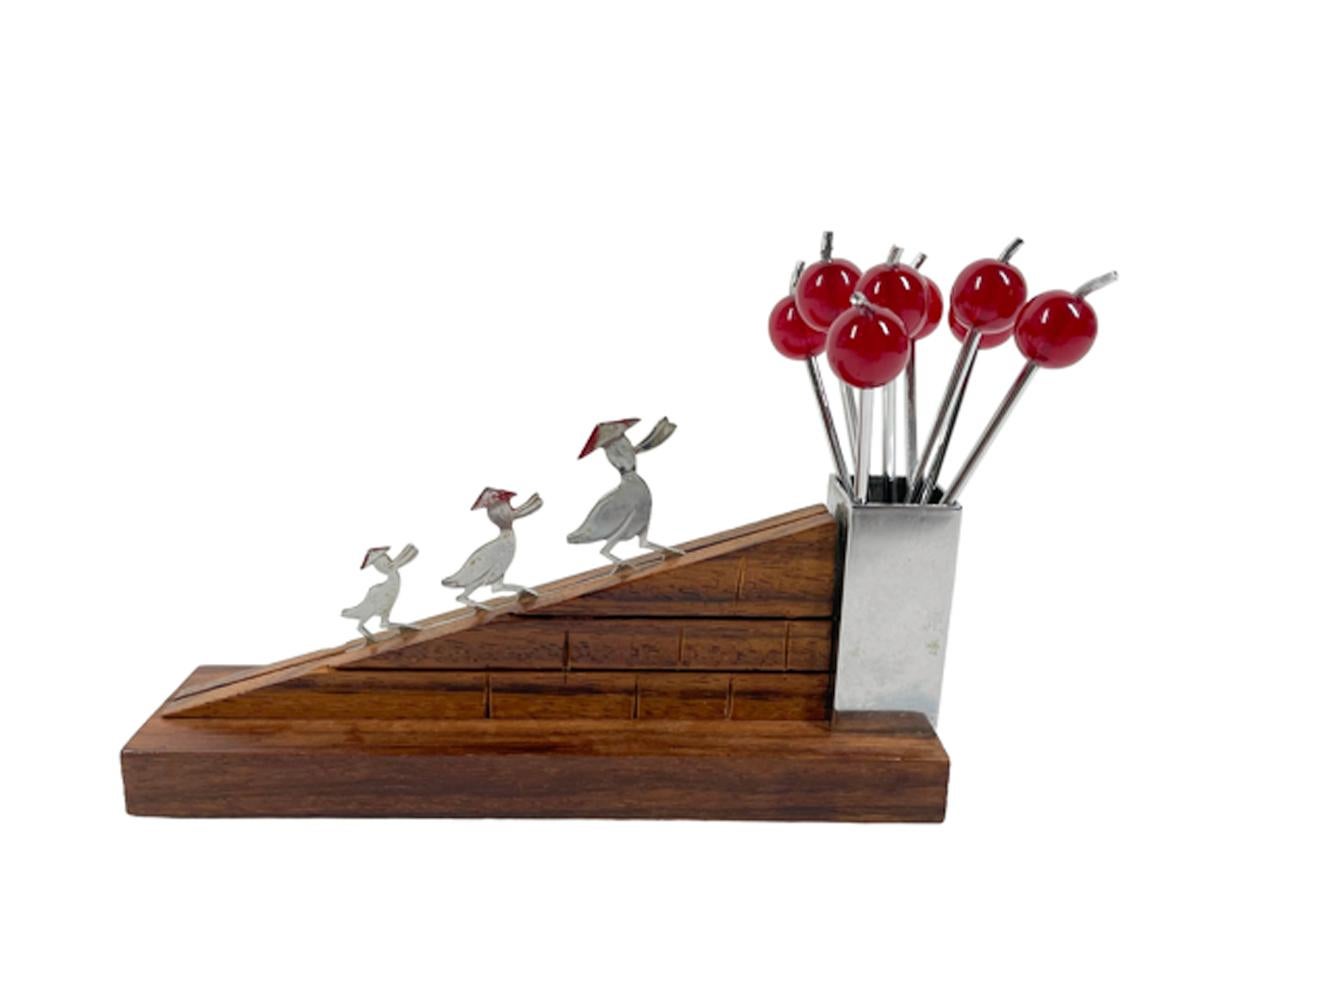 20th Century Art Deco Sudre Type Cocktail Pick Set w/Ducks Walking Up an Incline for Berries For Sale